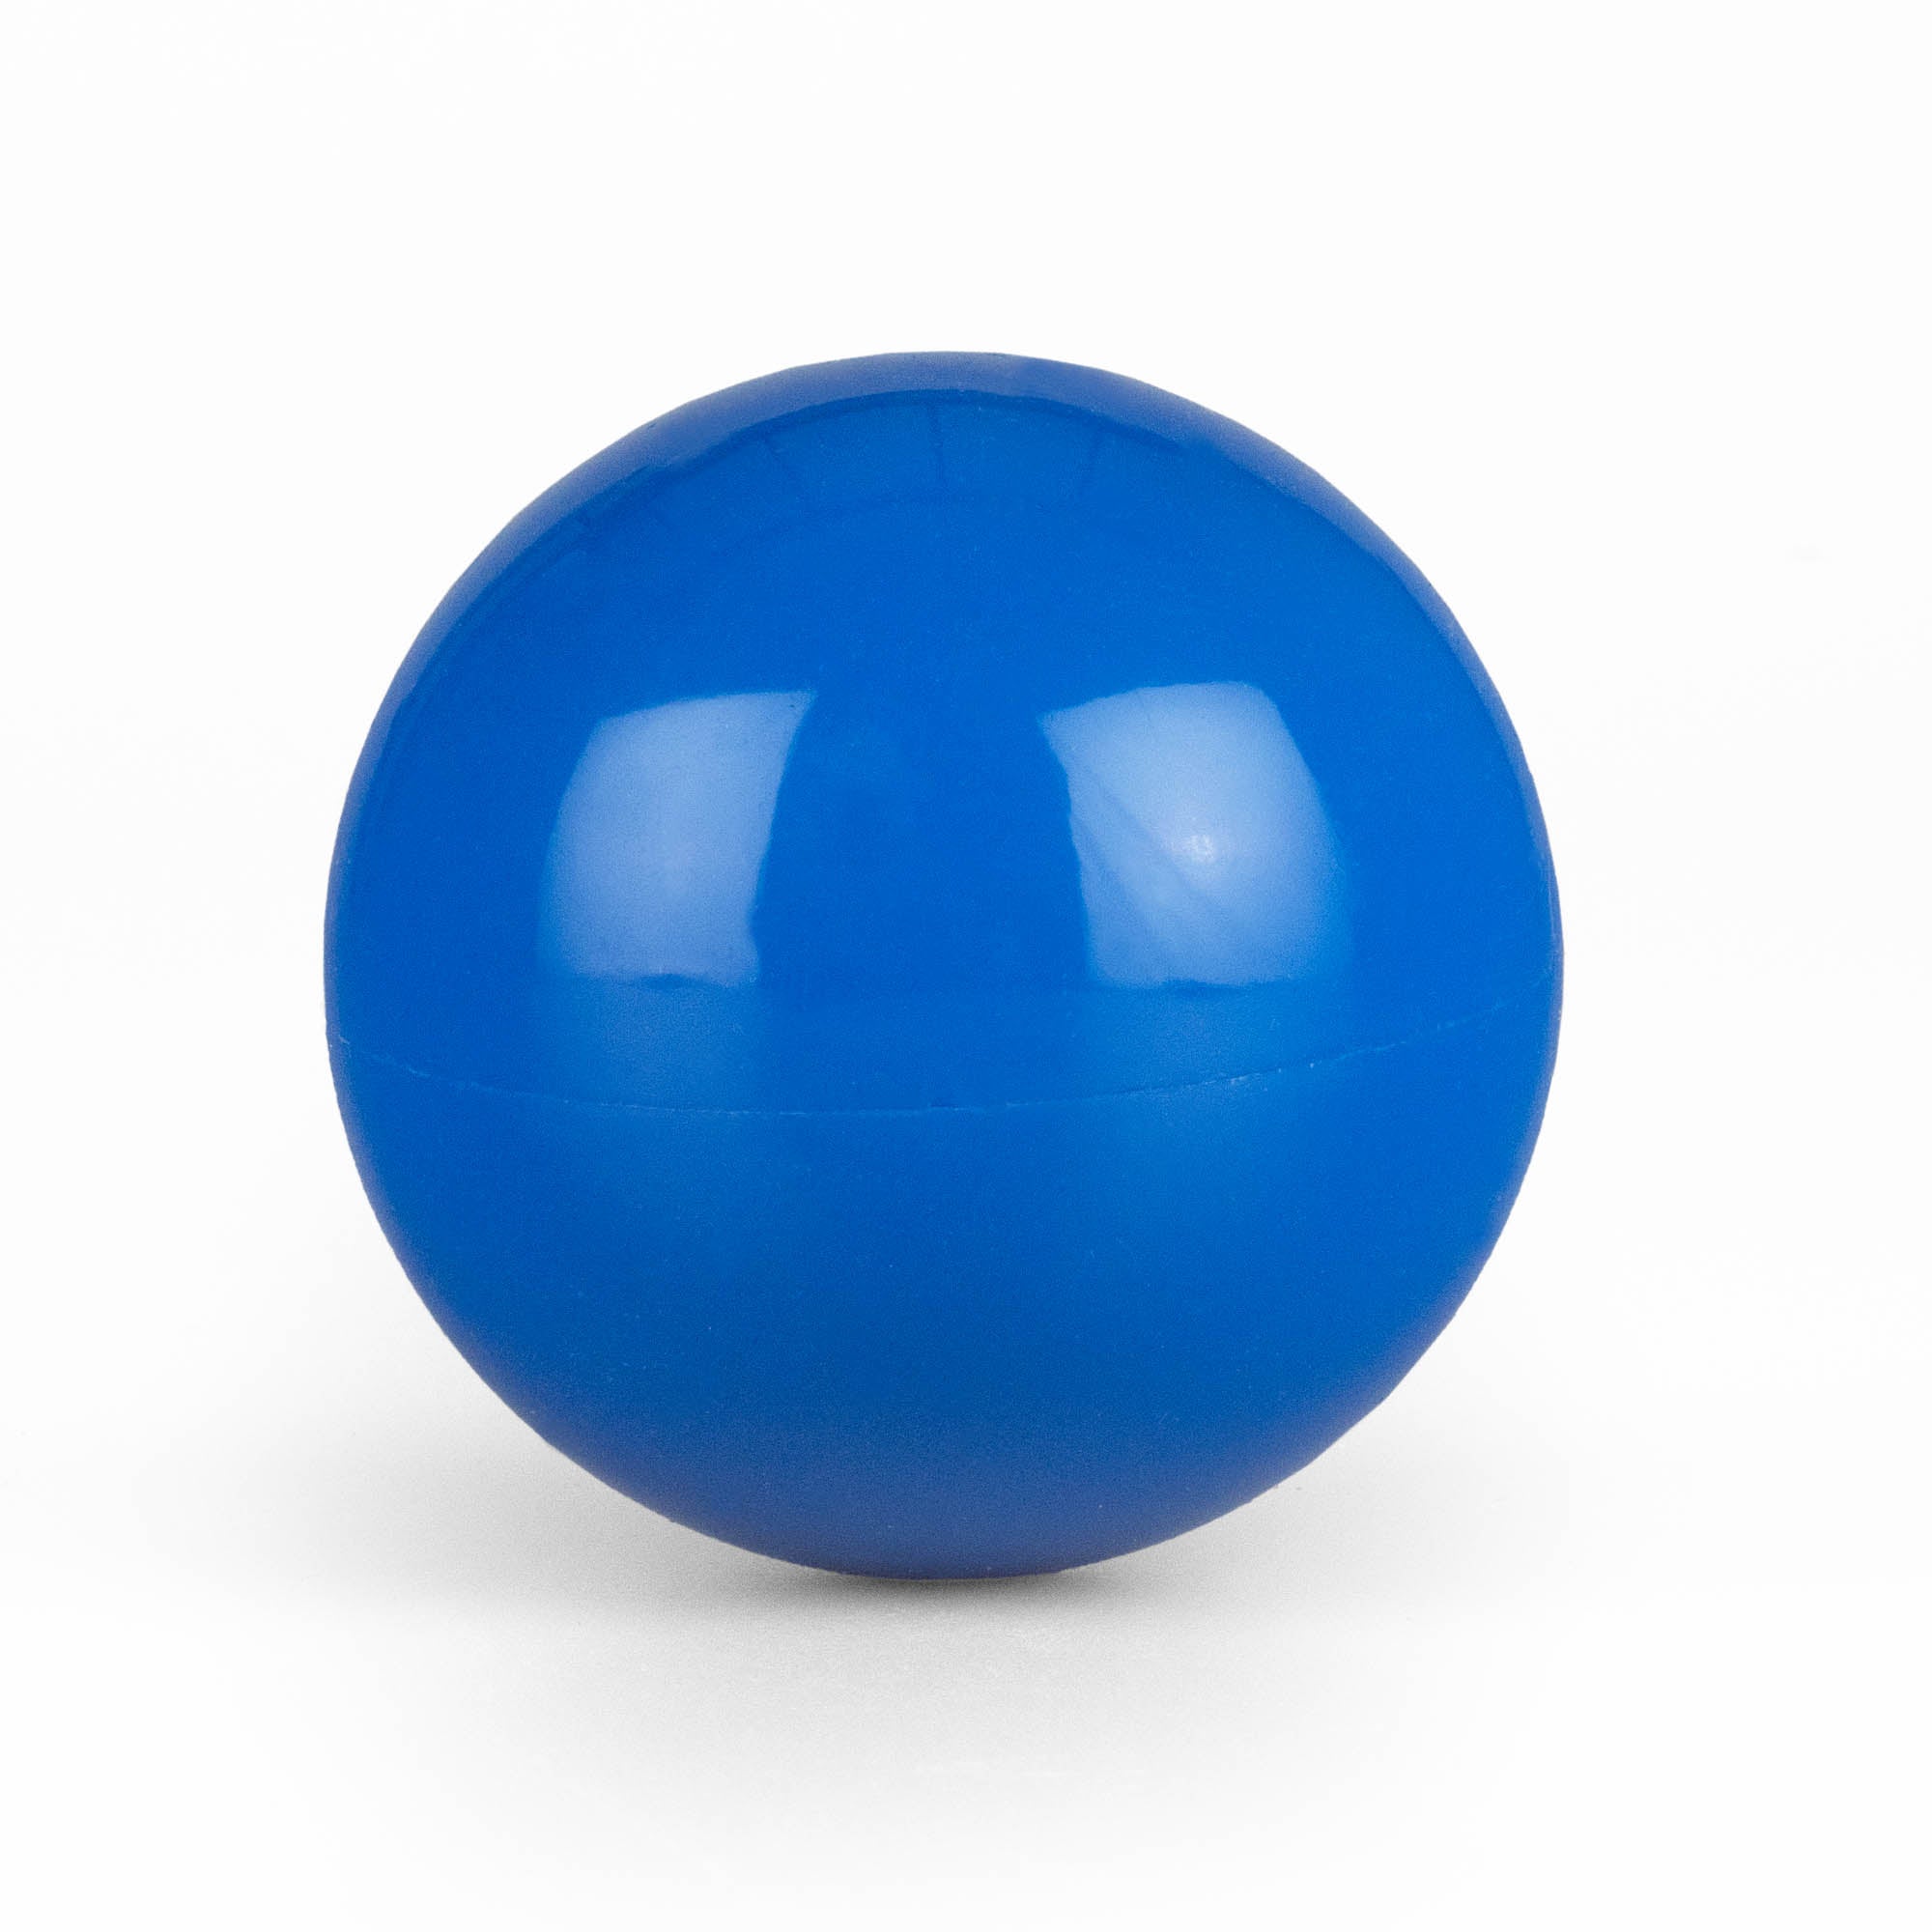 Mr babache stage ball 72mm in blue